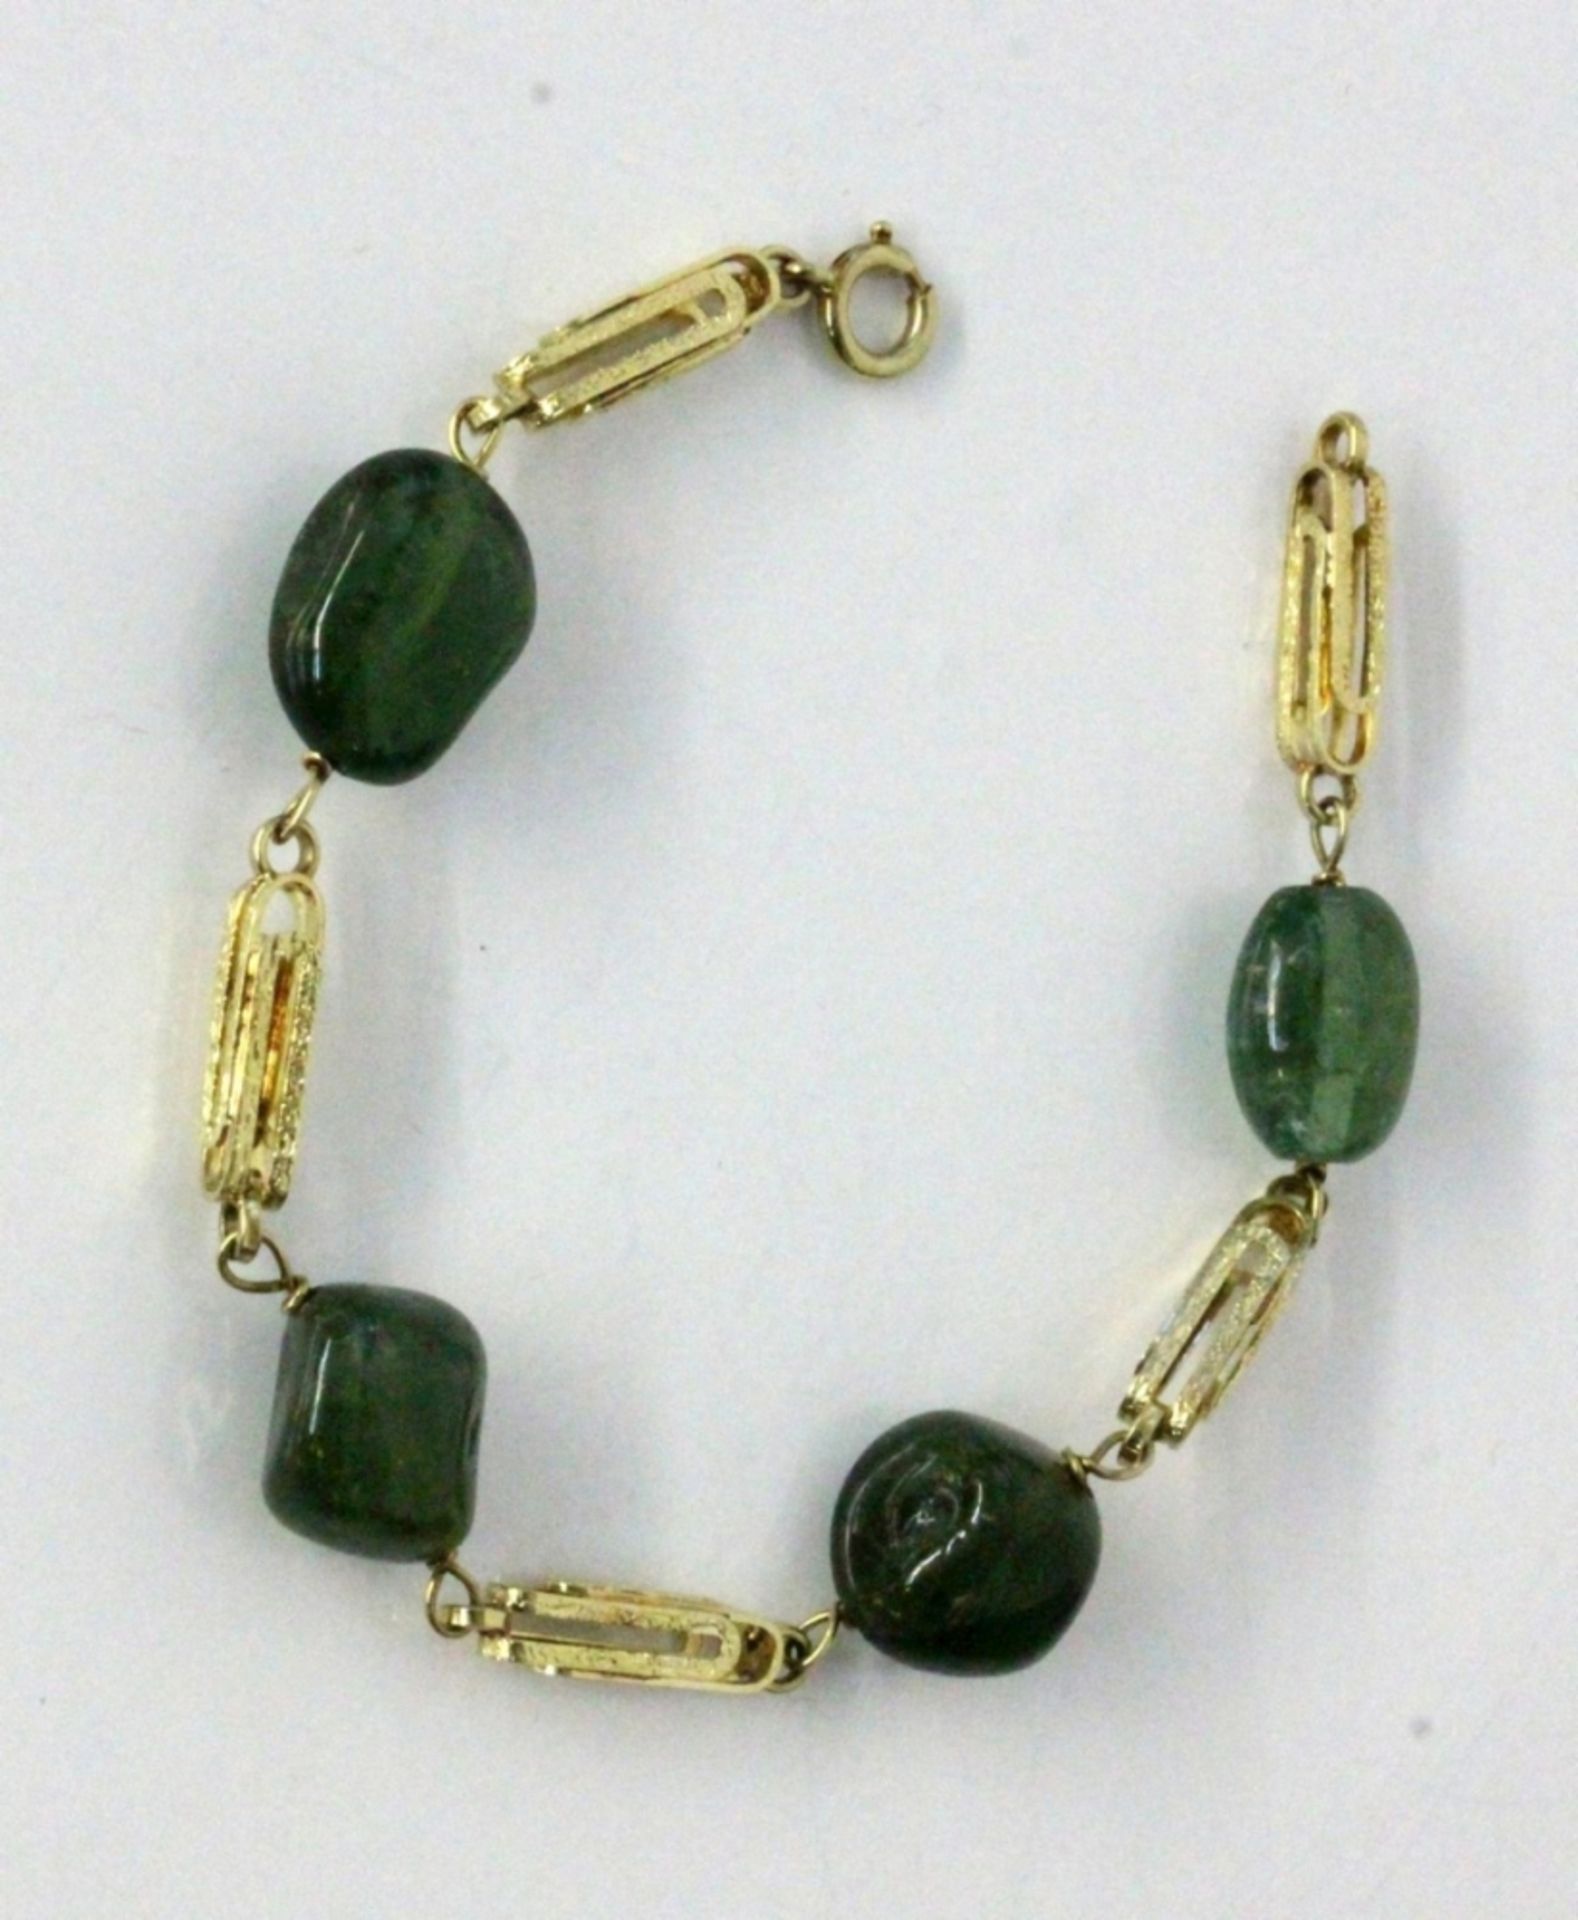 ARMBAND MIT JADENUGGETS585/000 Gelbgold. L.18cmA BRACELET WITH JADE NUGGETS 585/000 yellow gold.